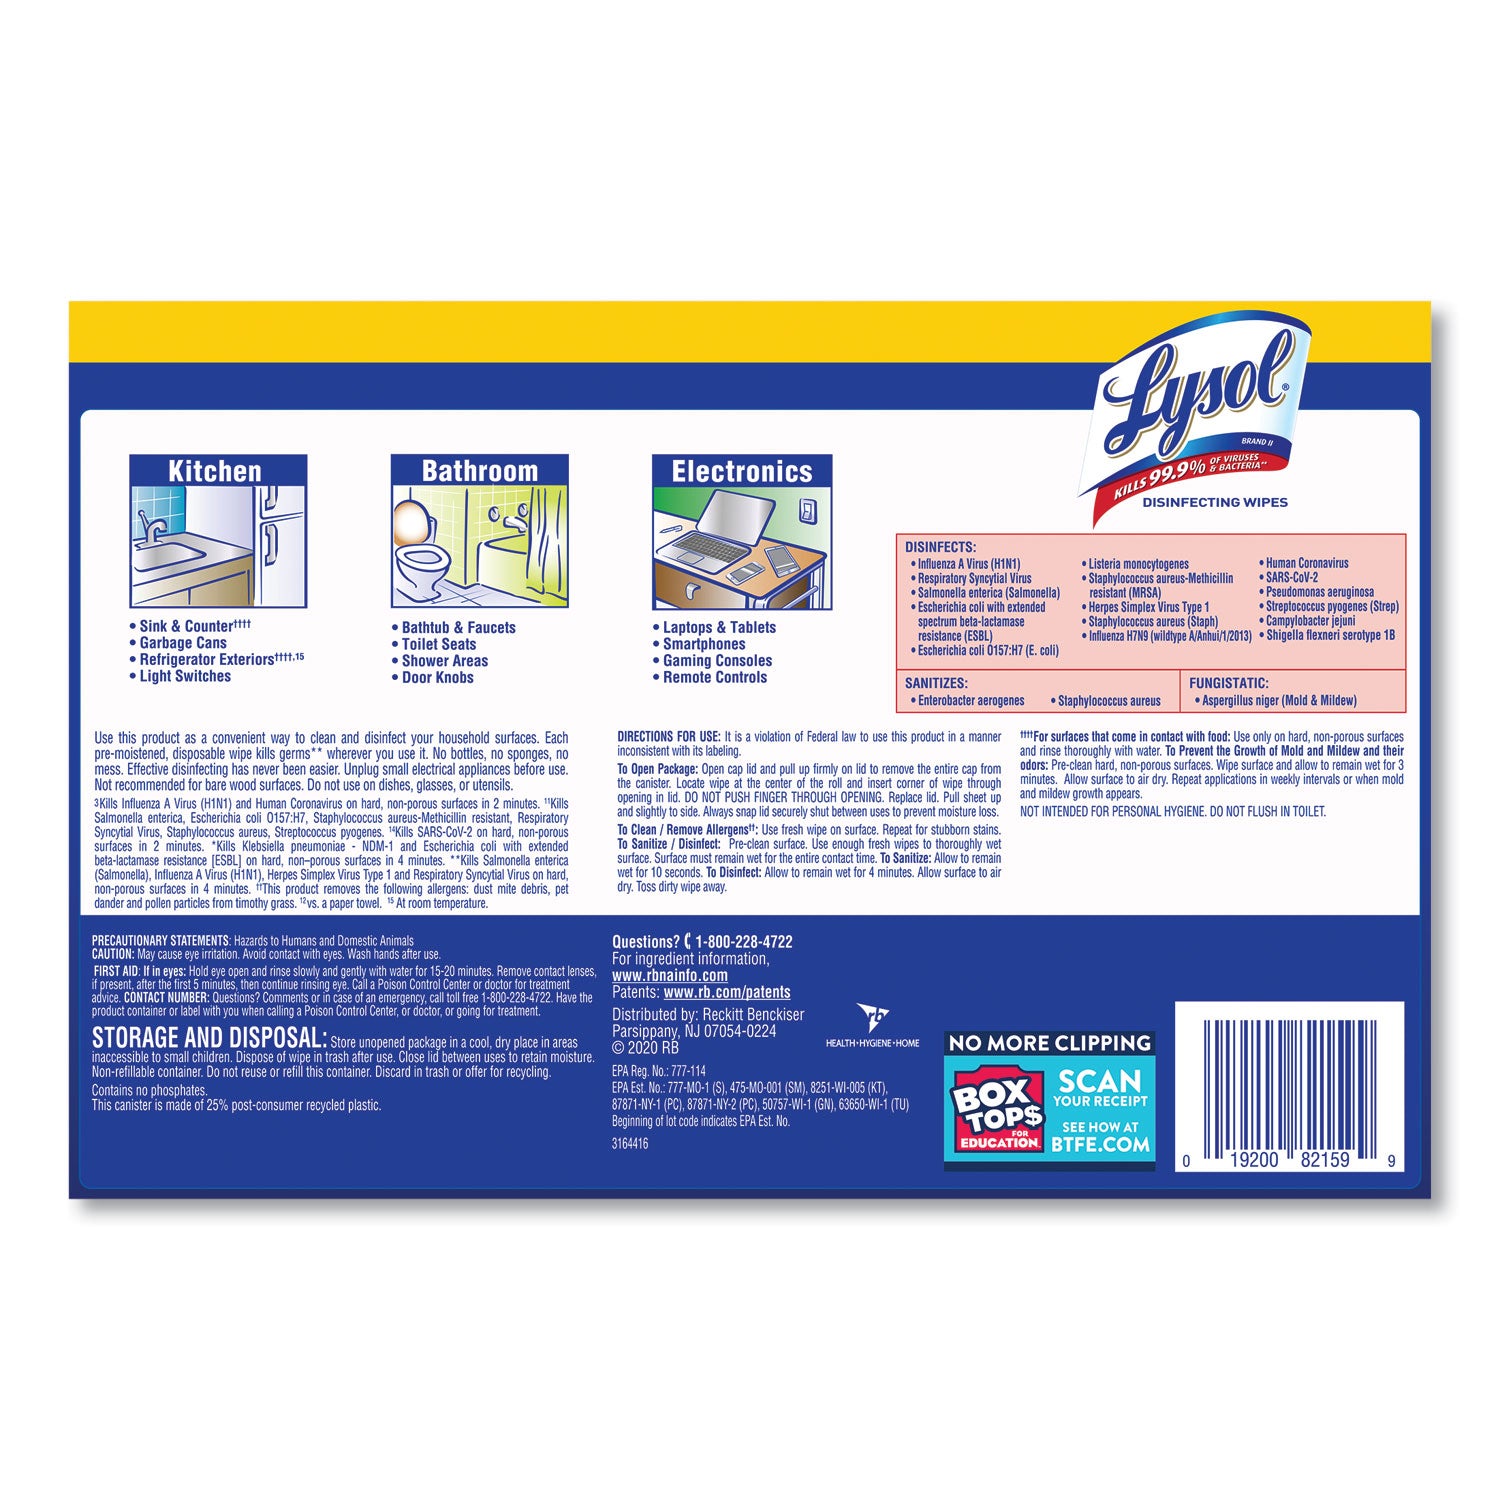 disinfecting-wipes-1-ply-7-x-725-lemon-and-lime-blossom-white-35-wipes-canister-3-canisters-pack_rac82159pk - 6